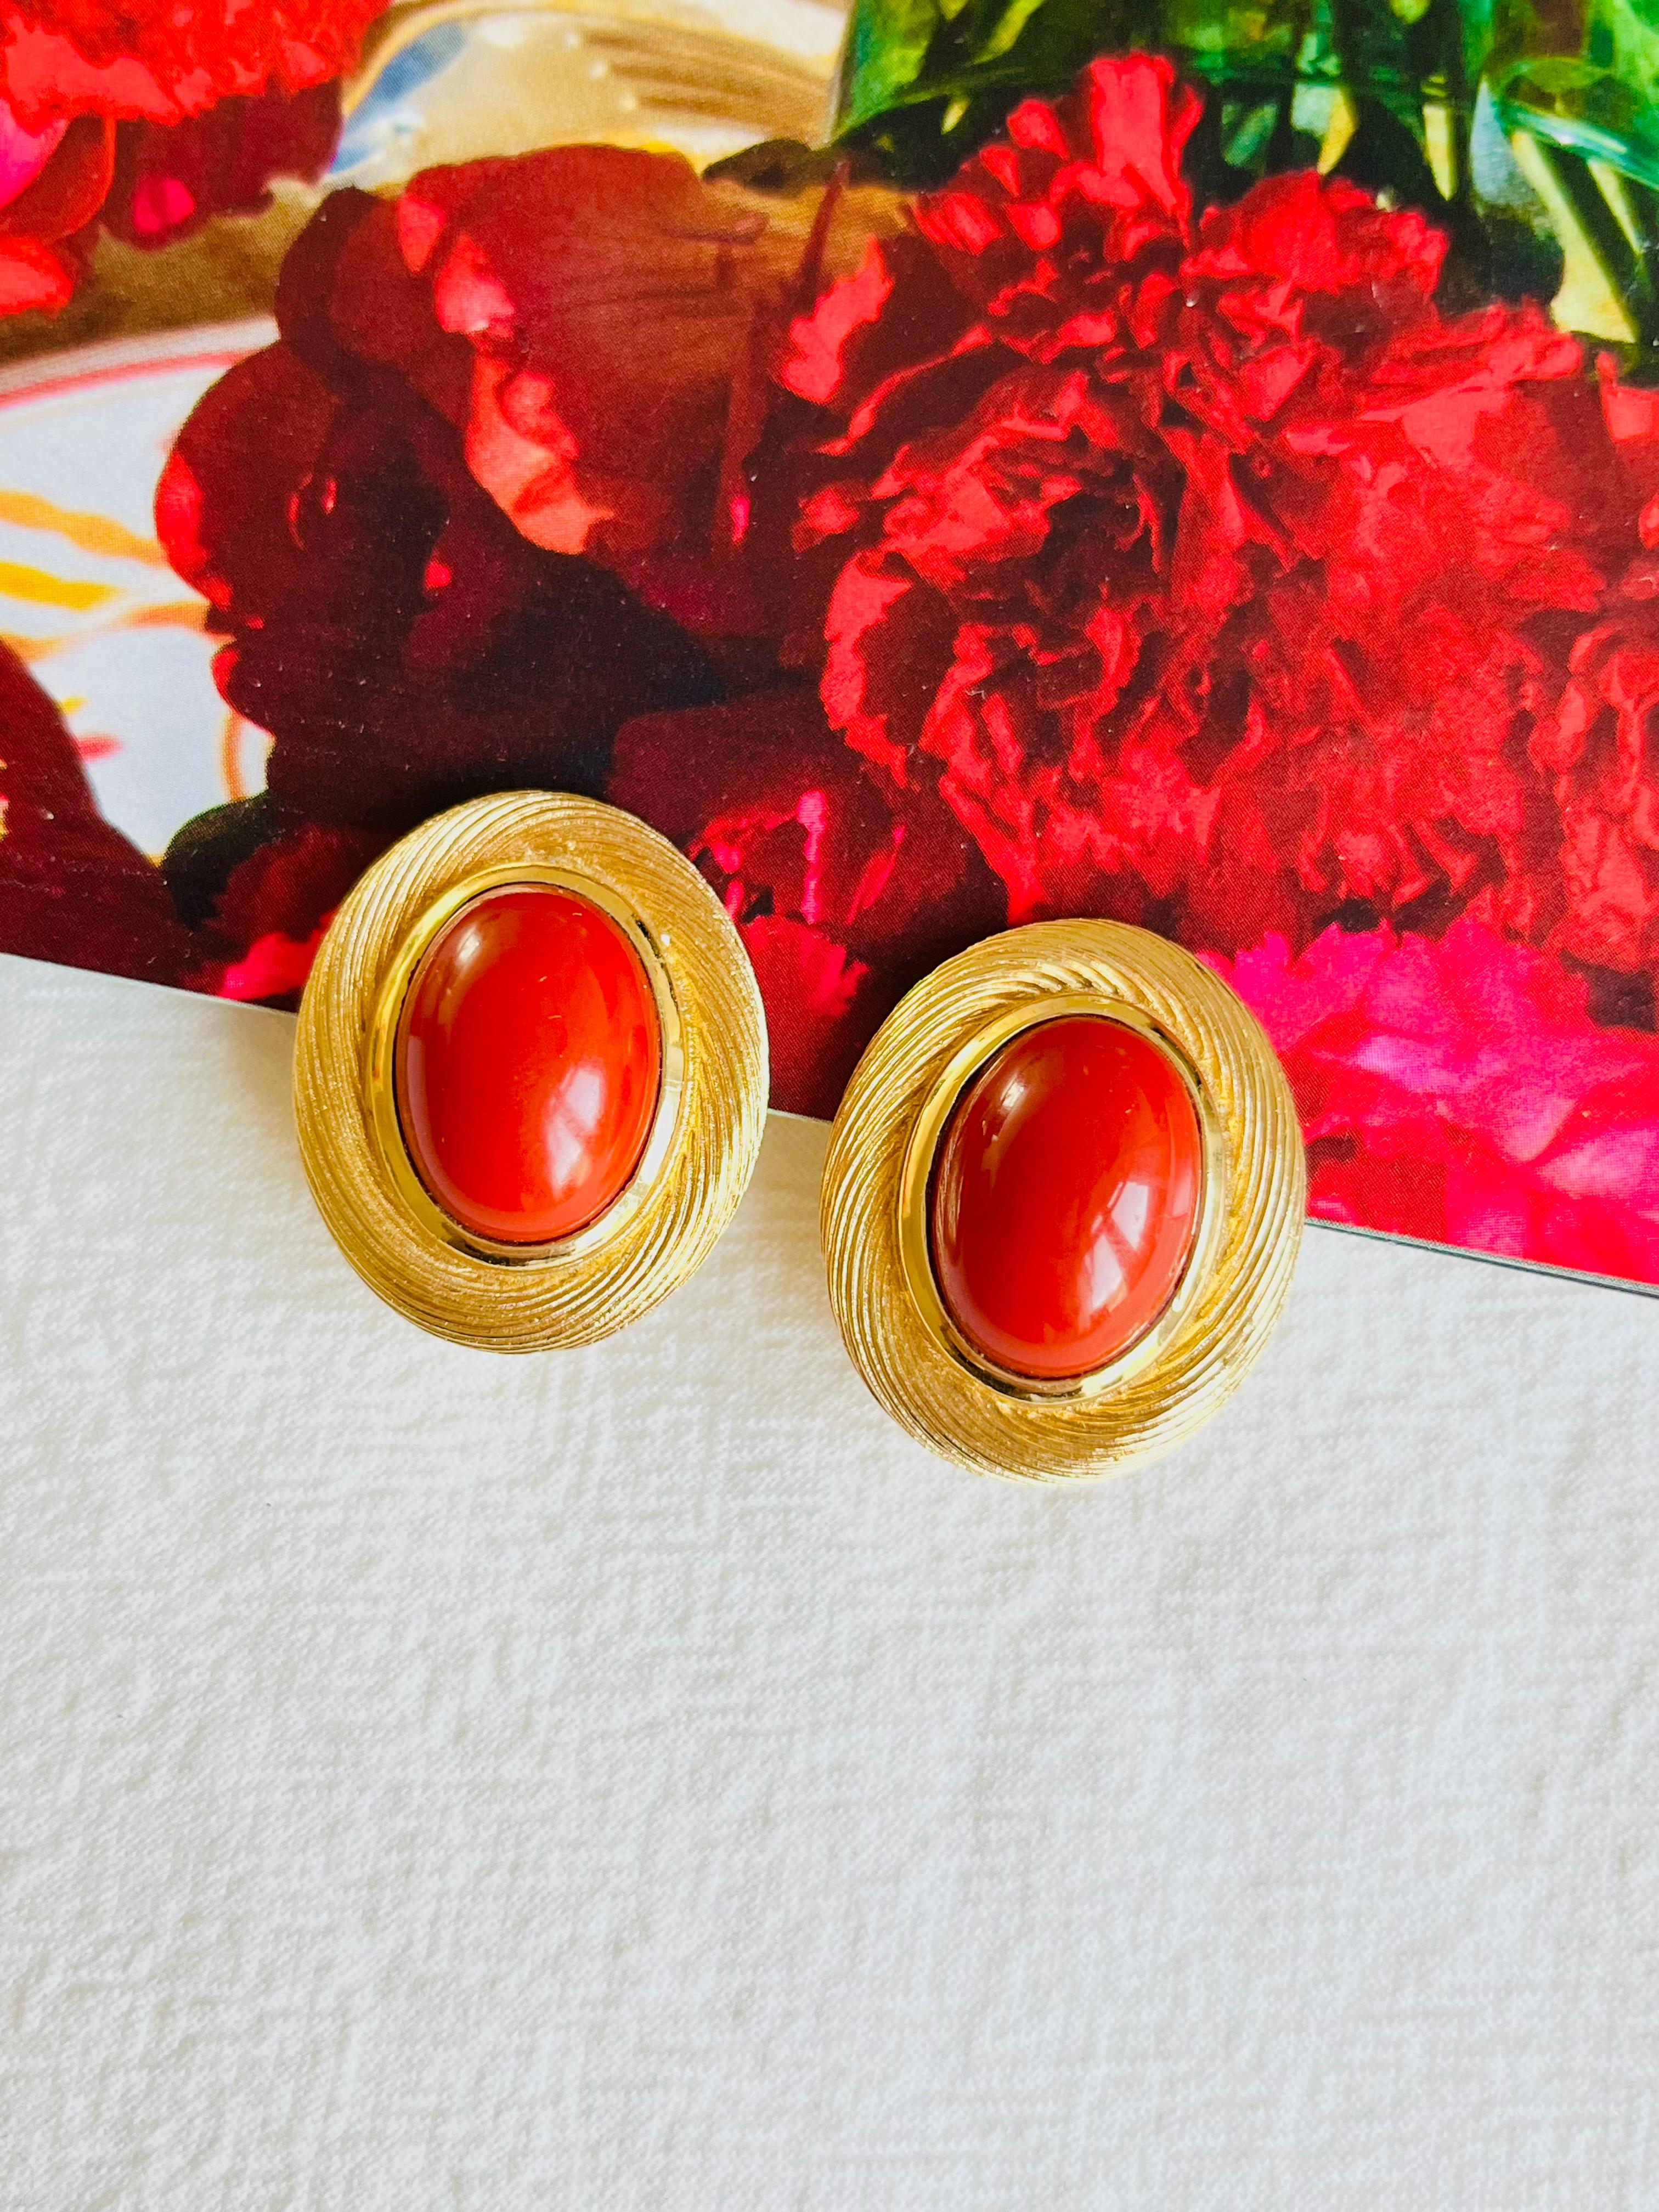 Very good condition. Vintage and rare to find. 100% Genuine.

Light scratches or colour loss, barely noticeable. 

A very beautiful pair of clip on earrings by Chr. DIOR, signed at the back.

Size: 3.0*2.7 cm.

Weight: 14.0 g/each.

_ _ _

Great for